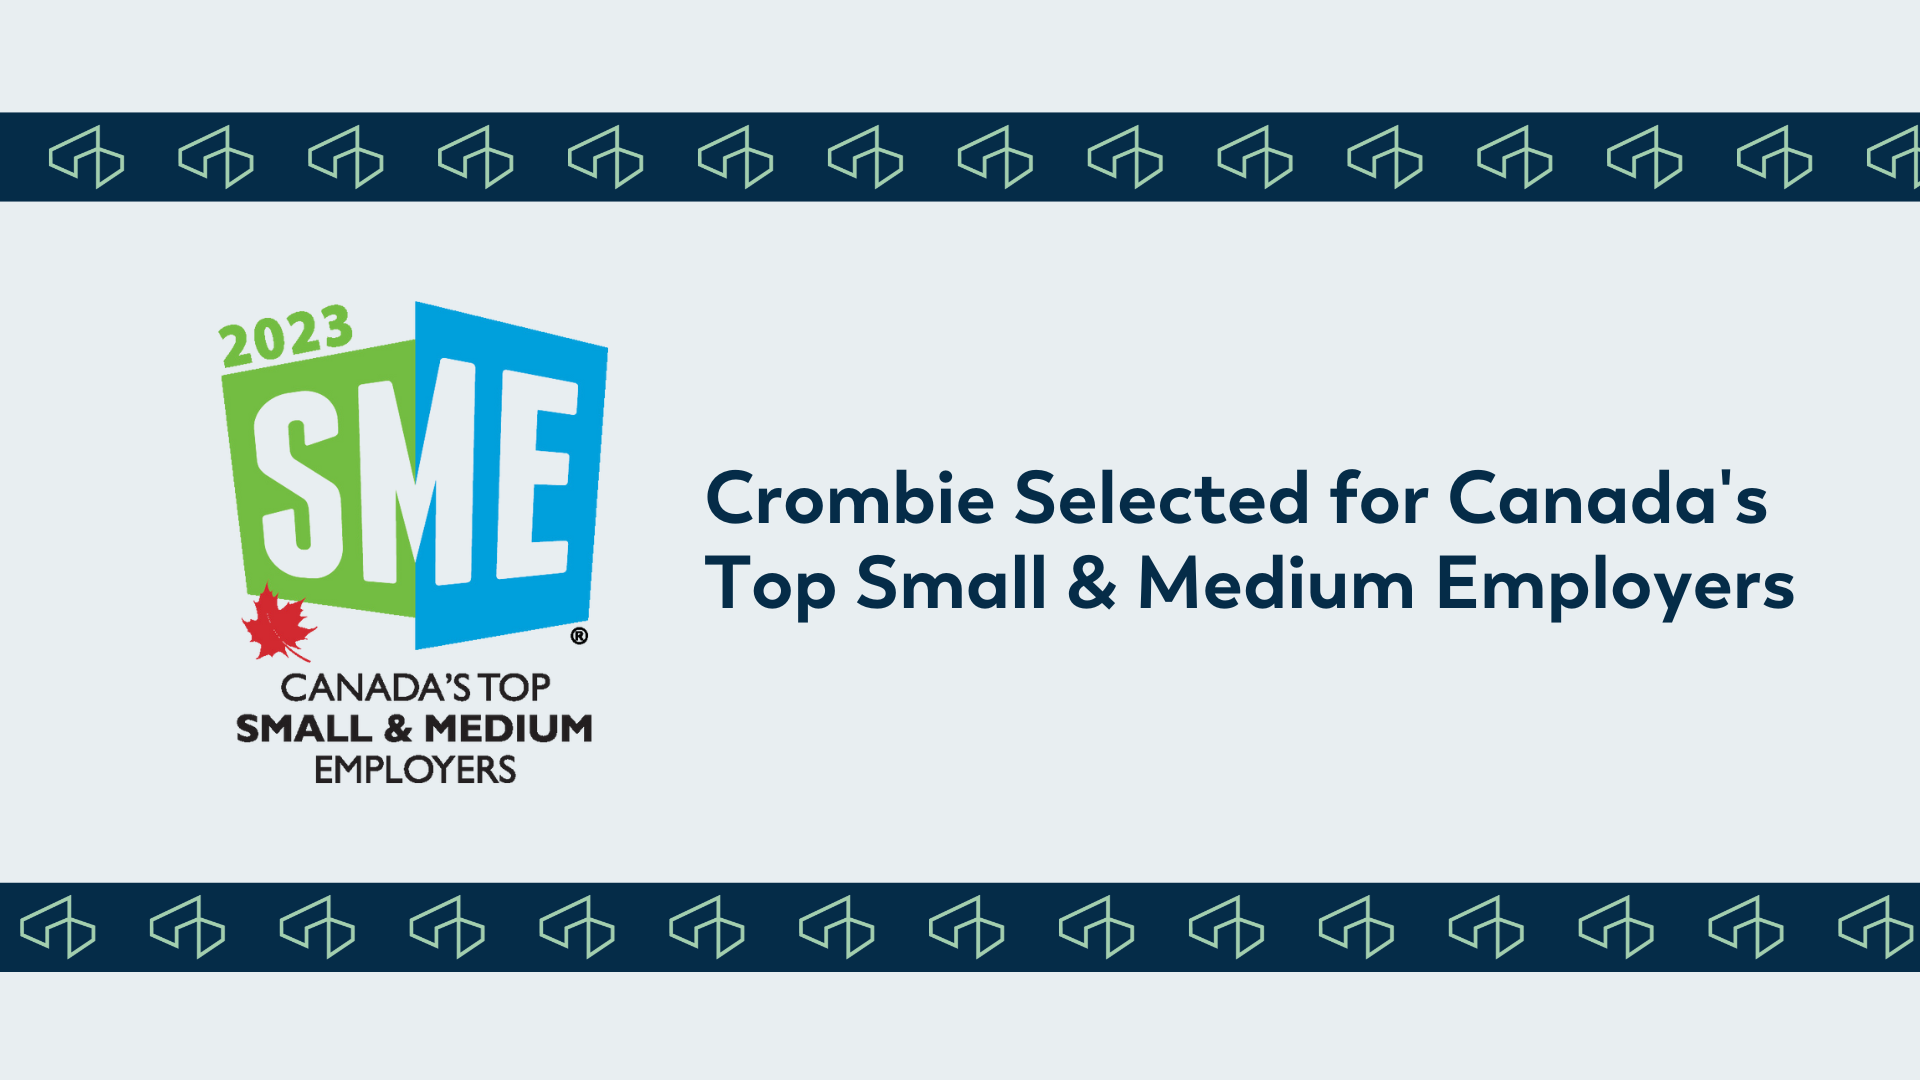 Featured image for “Crombie Selected for Canada’s Top Small & Medium Employers”